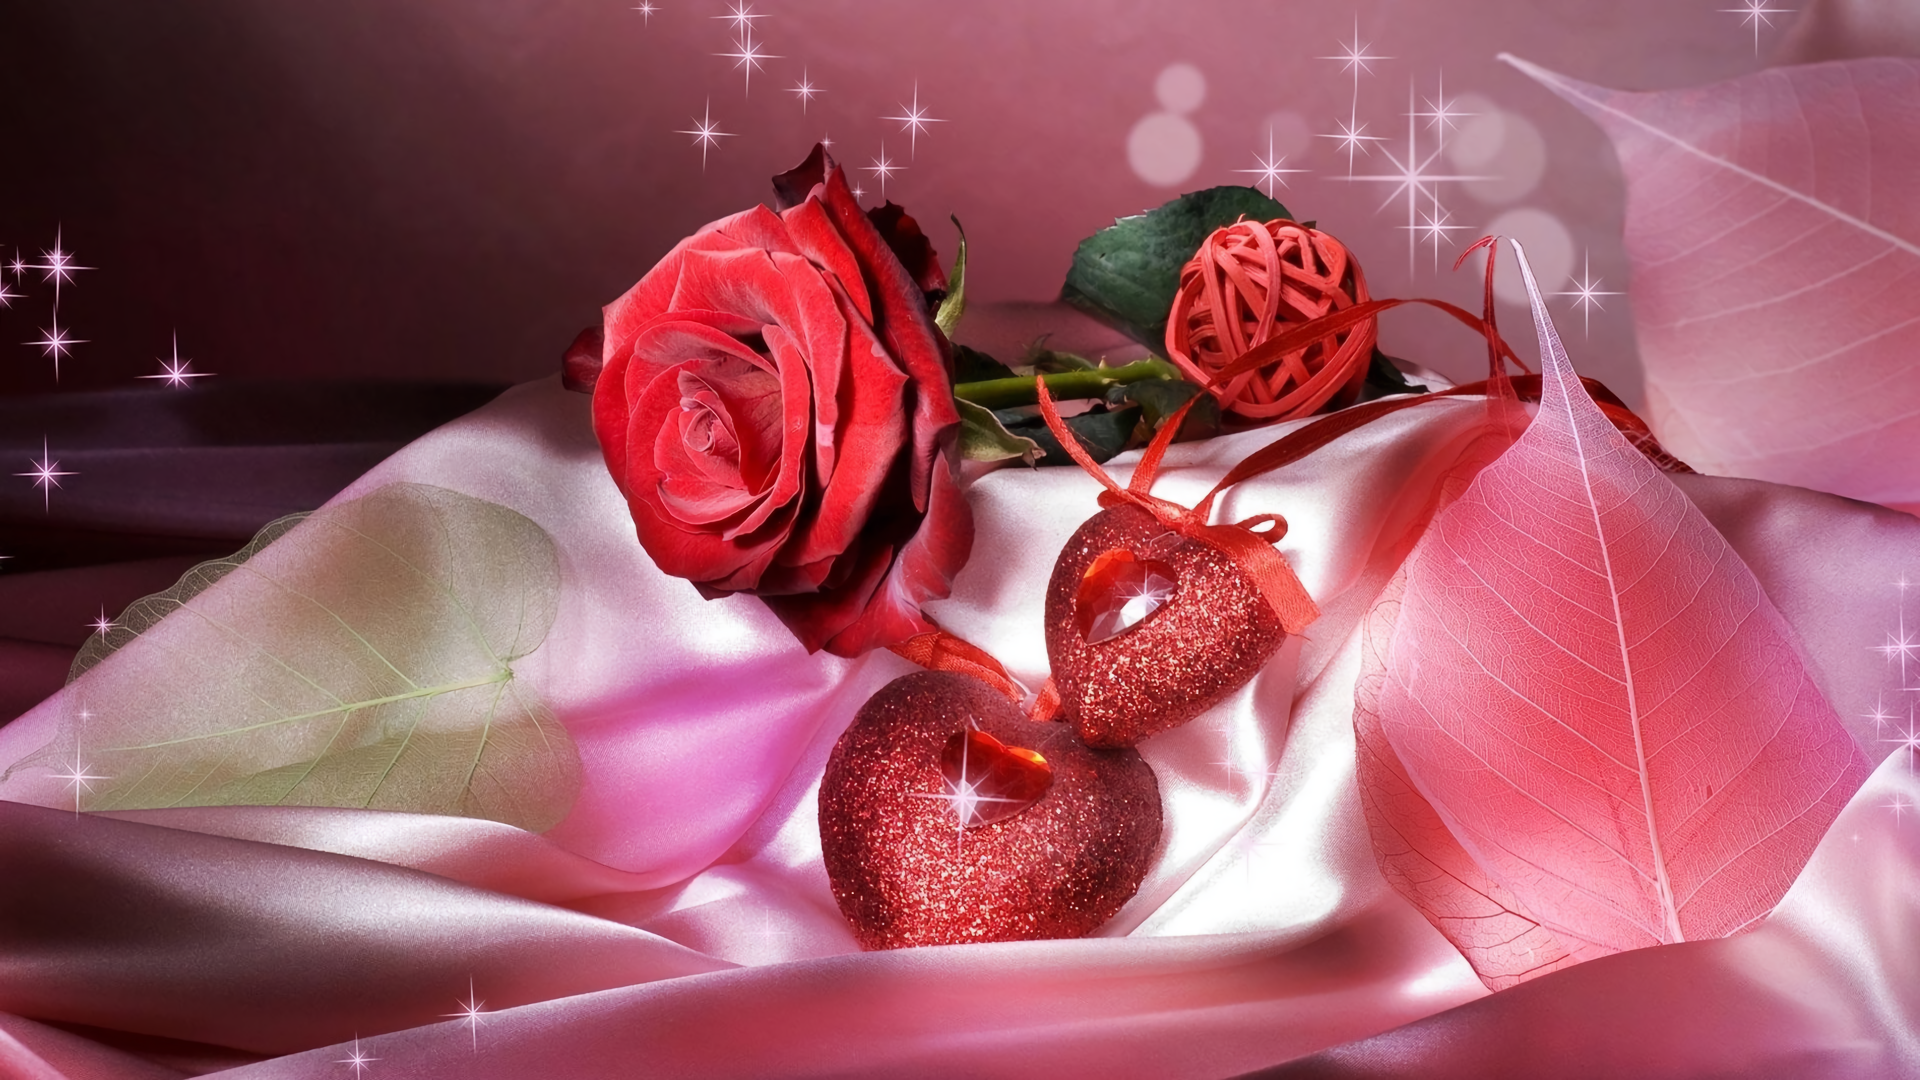 Holiday Valentines Day Rose Heart Jewelry Leaf Sparkles Pink Red Rose 1920x1080